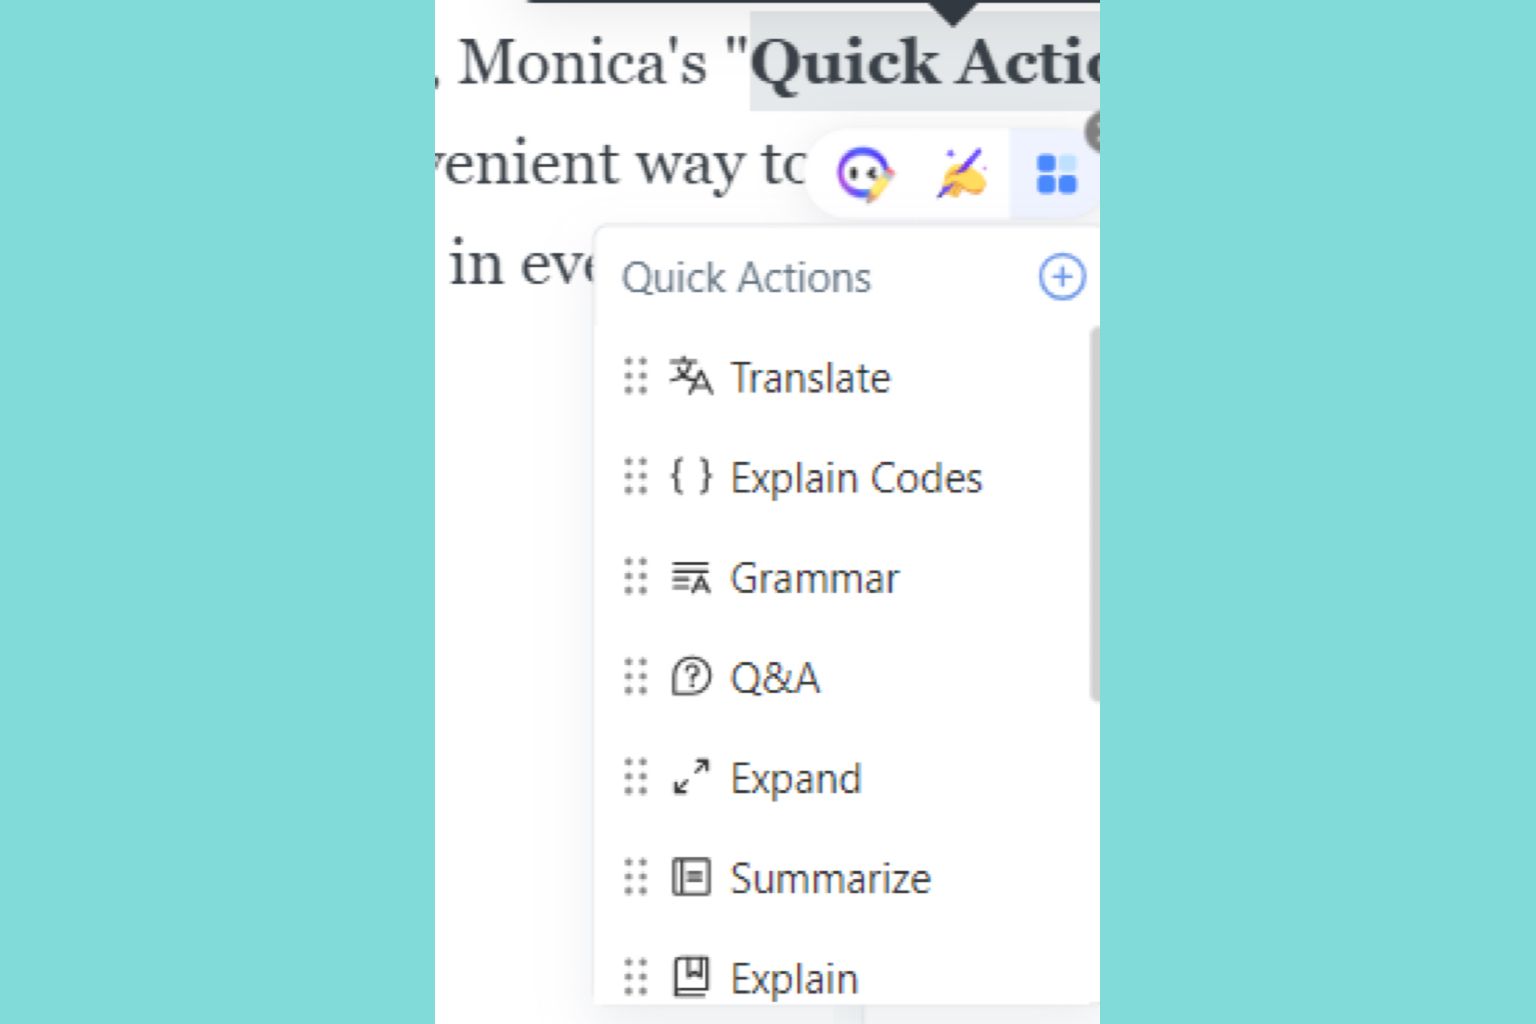 You can use quick action in Monica, you can customize your own prompts and adjust the order.